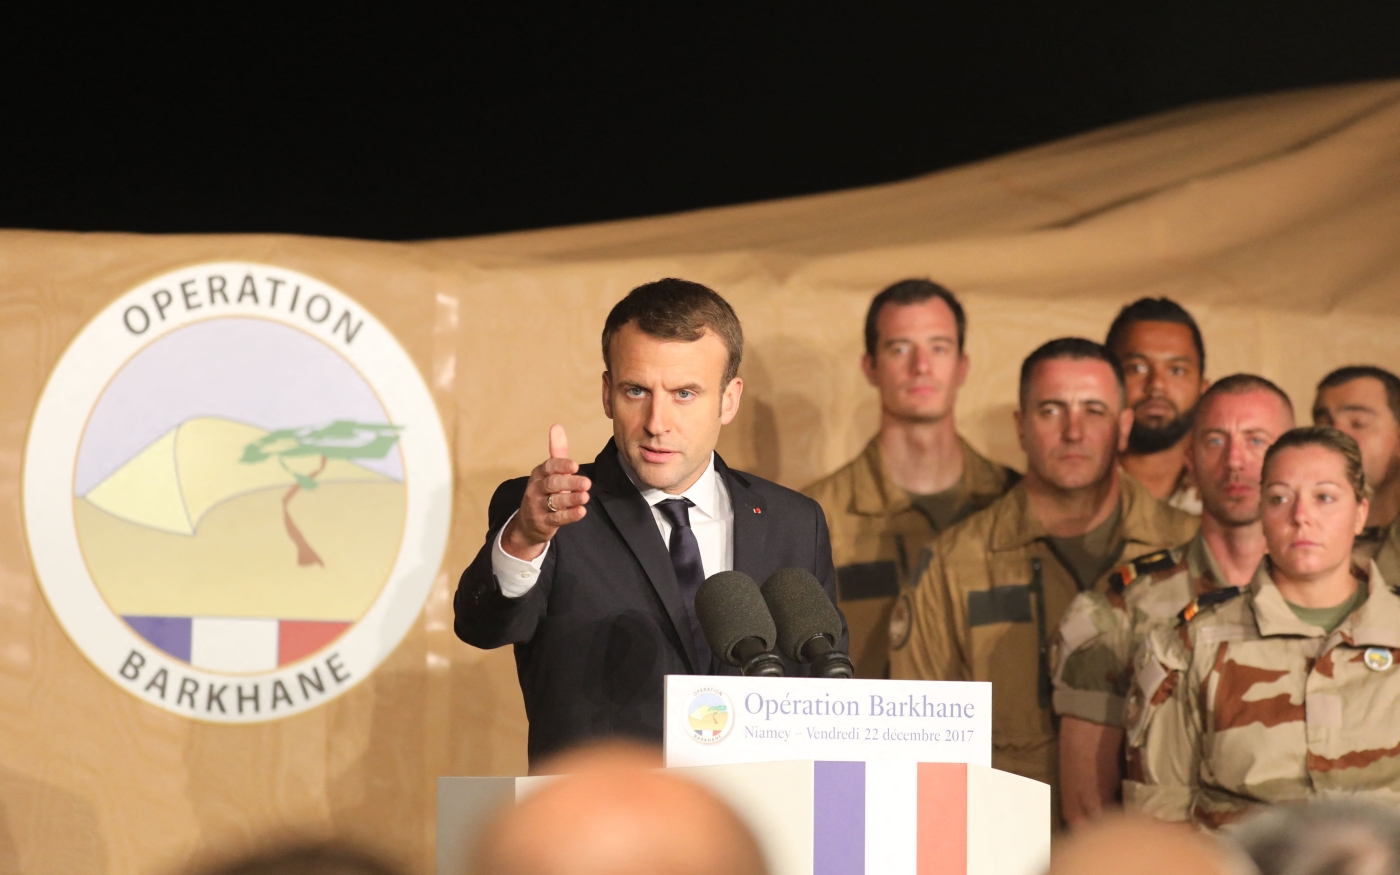 Macron speaks to French soldiers from Operation Barkhane on December 22 2017 during a visit to the French air force base in Niamey, Niger. (Ludovic Marin/AFP)